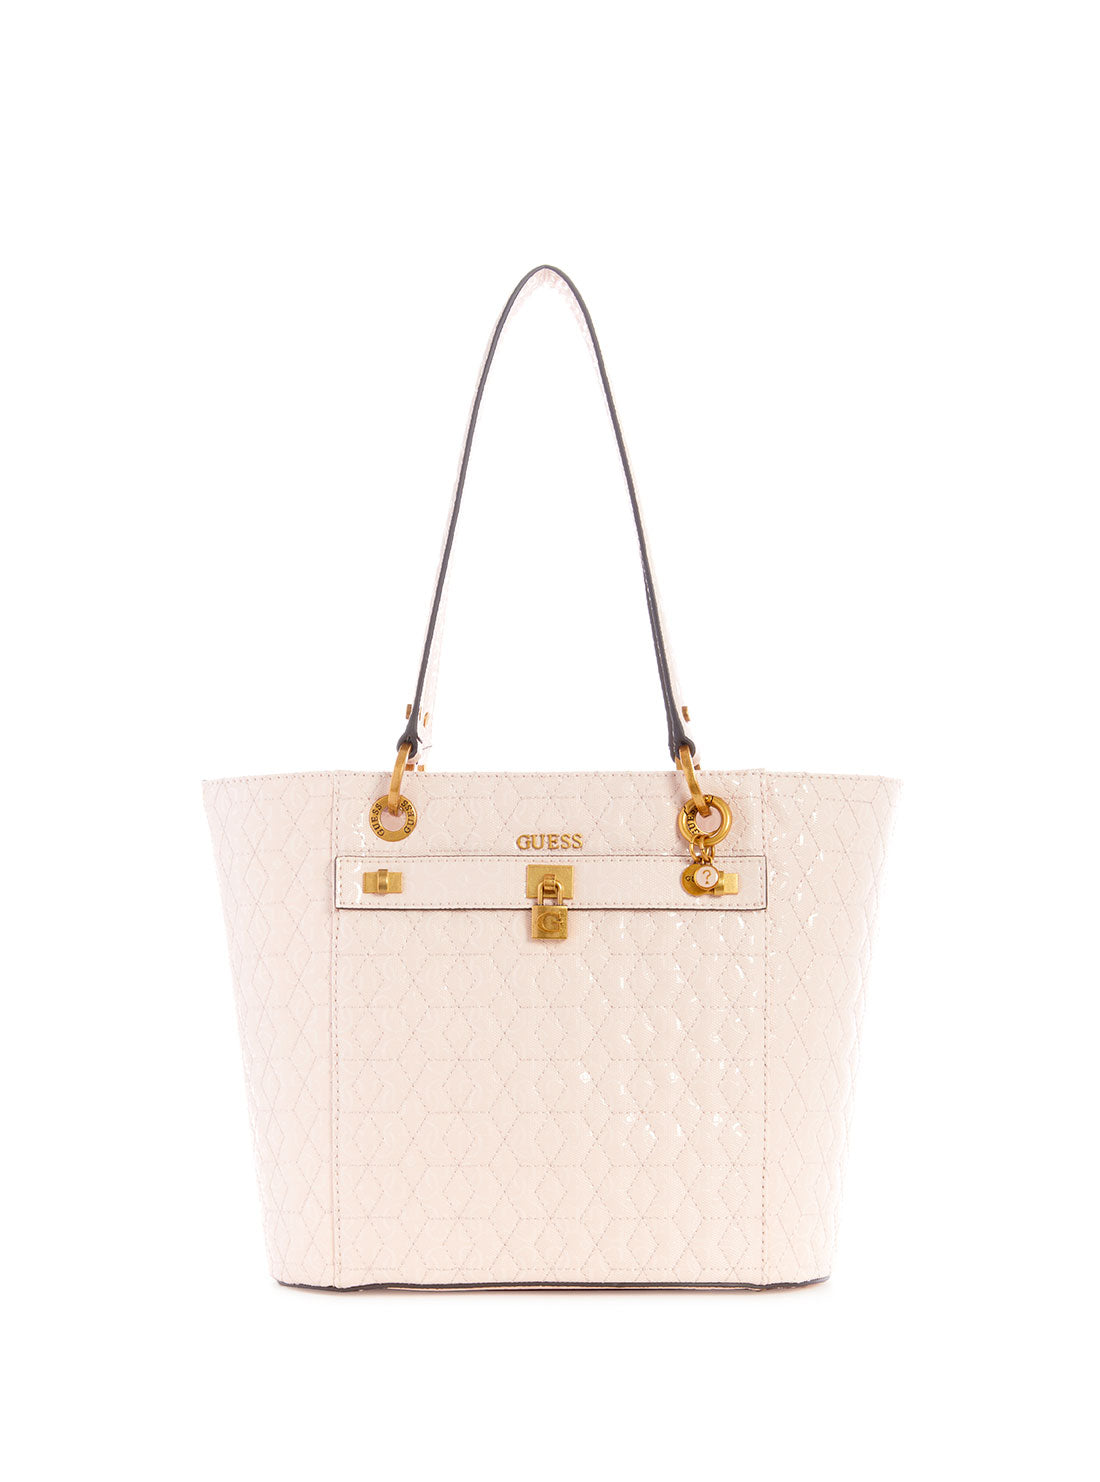 GUESS Shell Tote Bags for Women